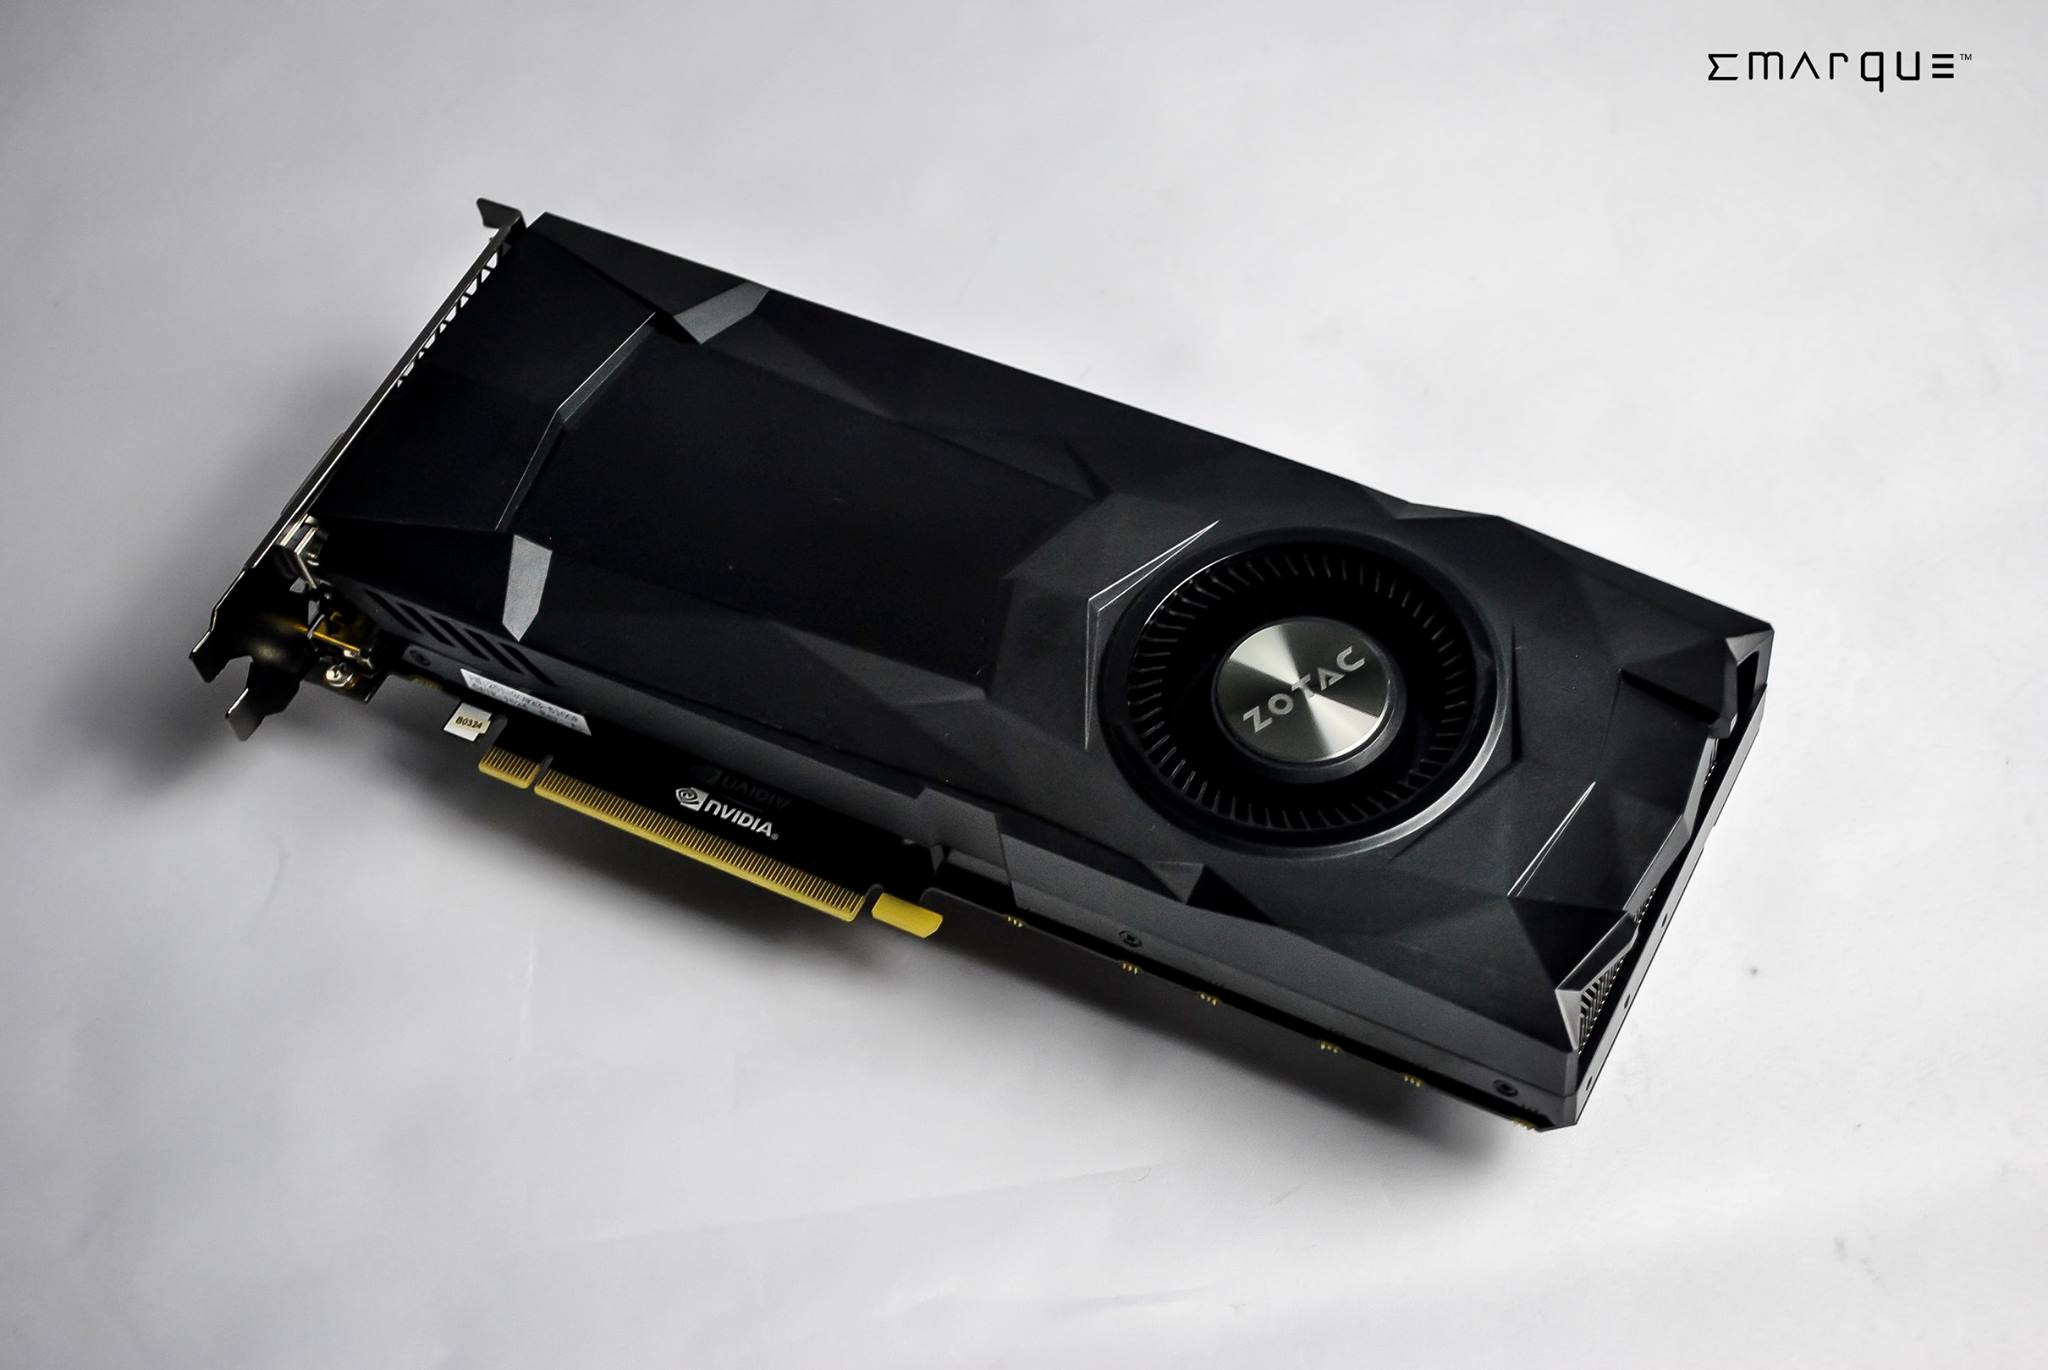 ZOTAC GeForce GTX 1070 Reference Edition is completely black